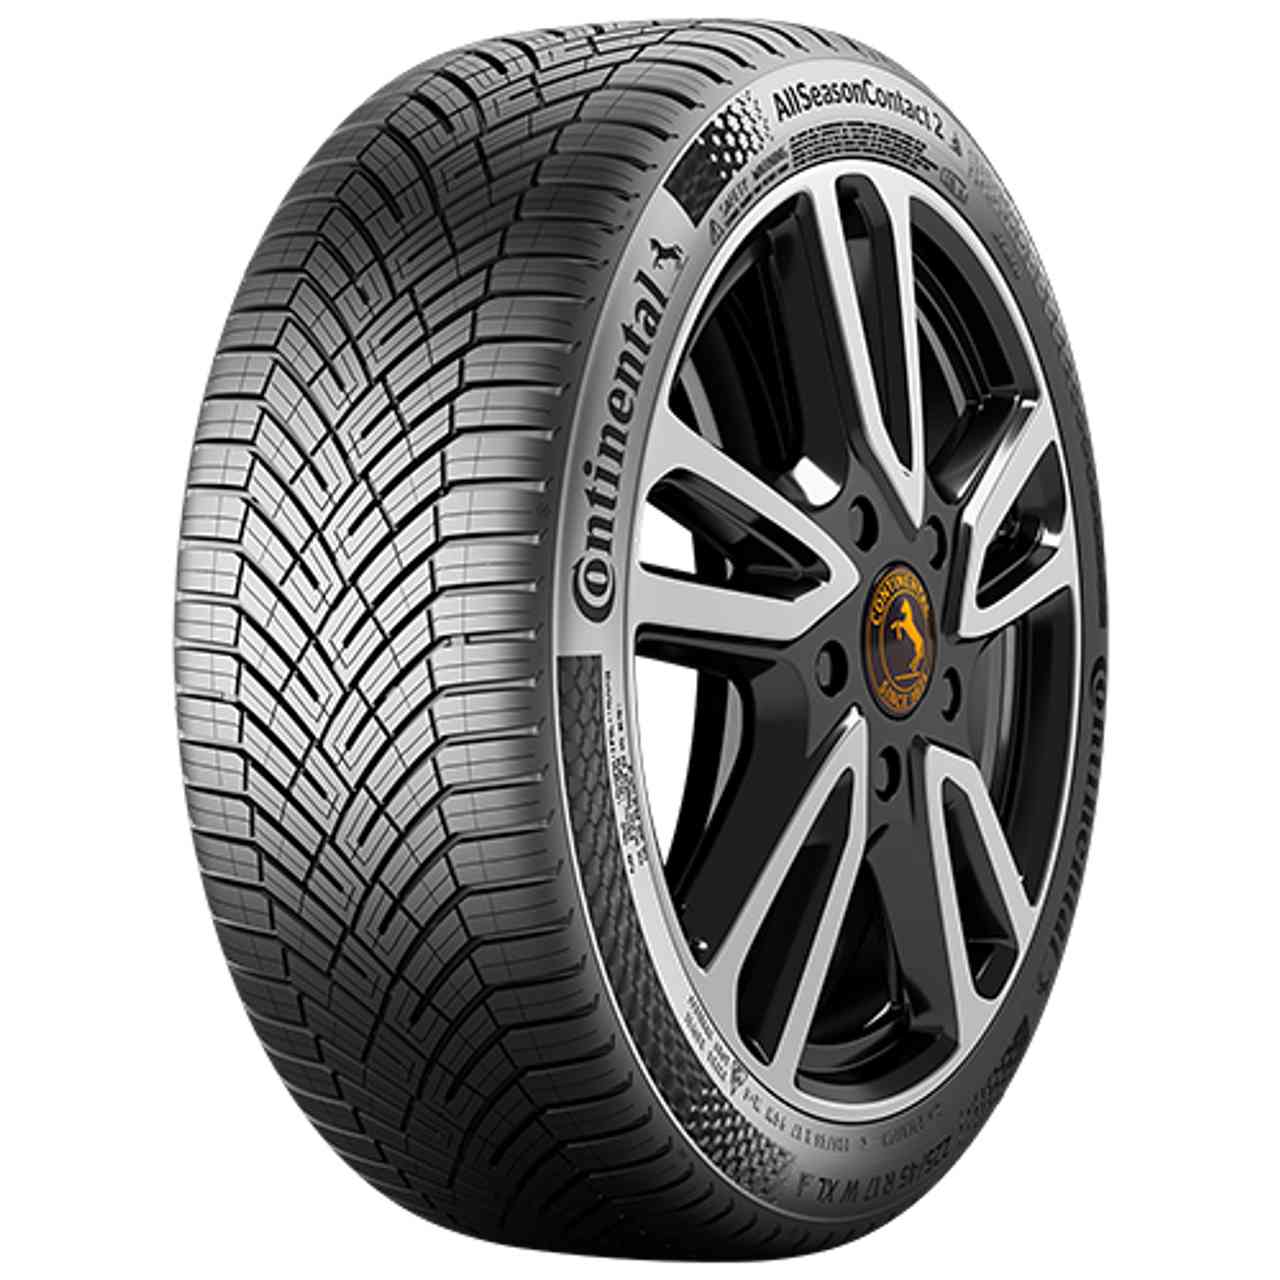 CONTINENTAL ALLSEASONCONTACT 2 (EVc) 255/55R18 105T BSW